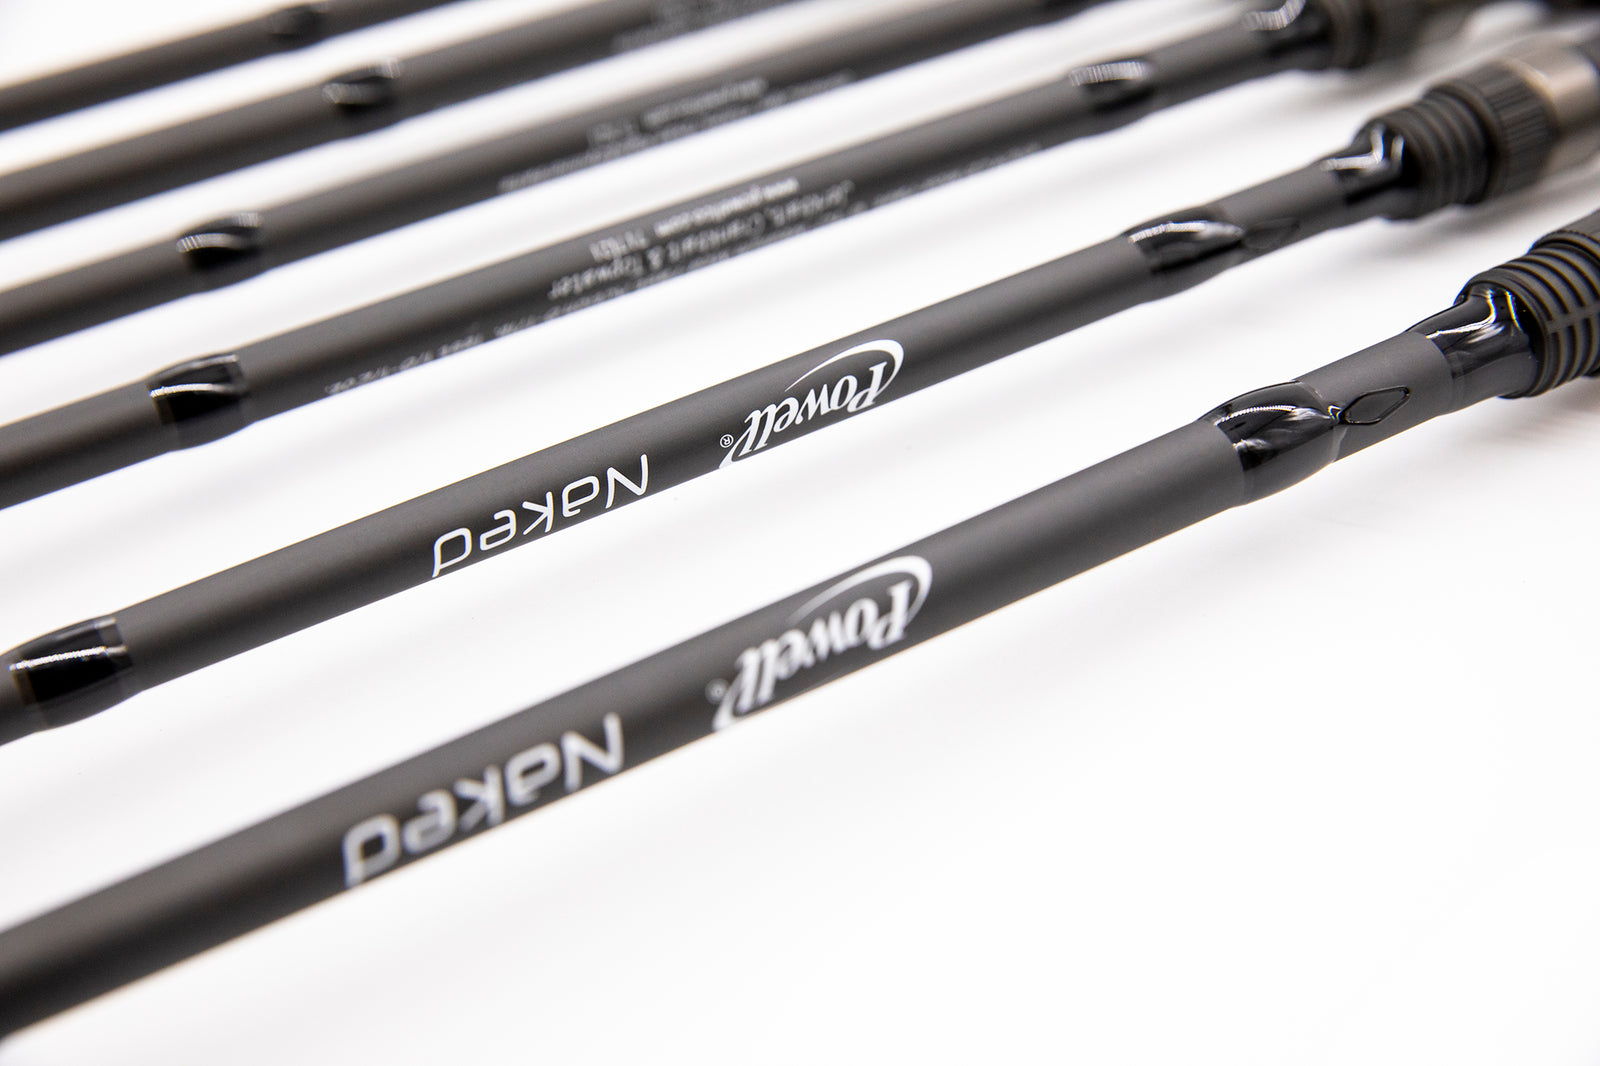 Naked 703 MH CEF - Powell Rods